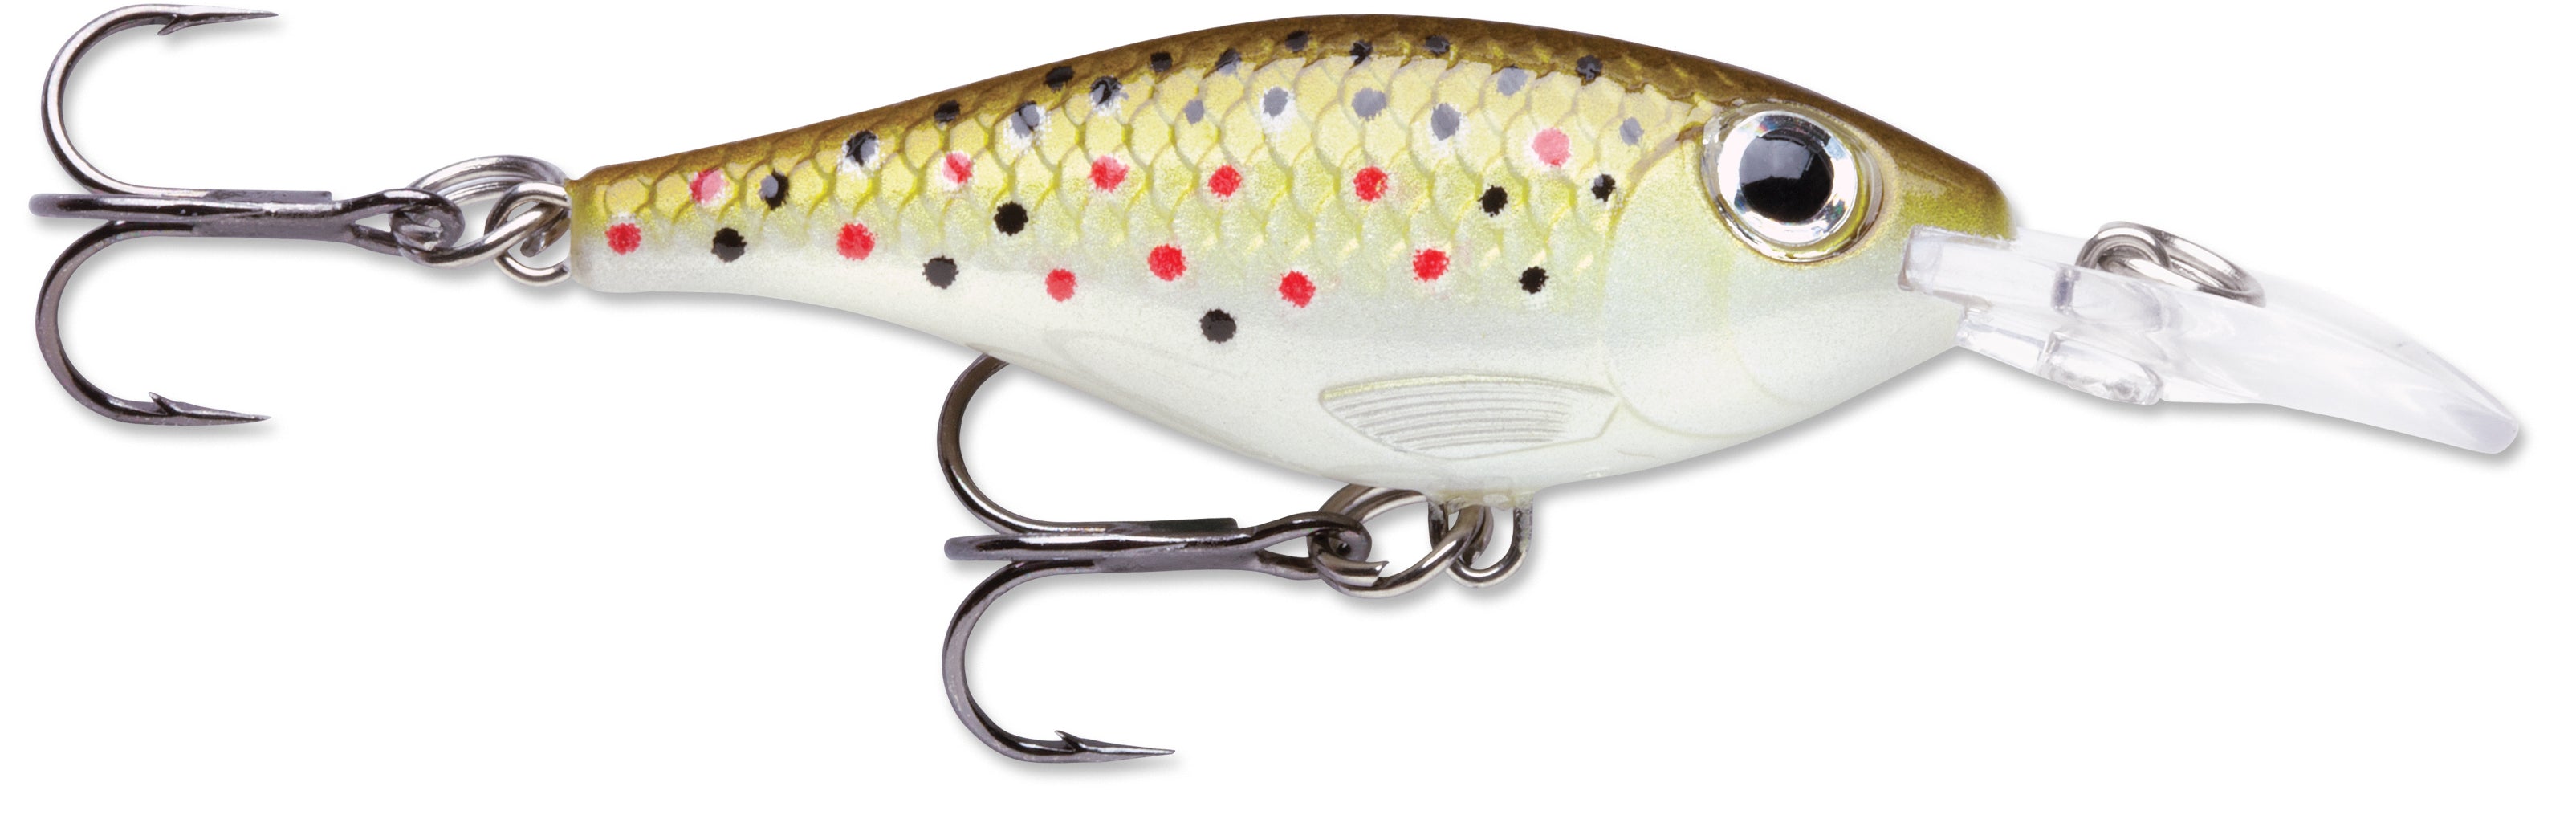 Ultra Light Shad_Trout